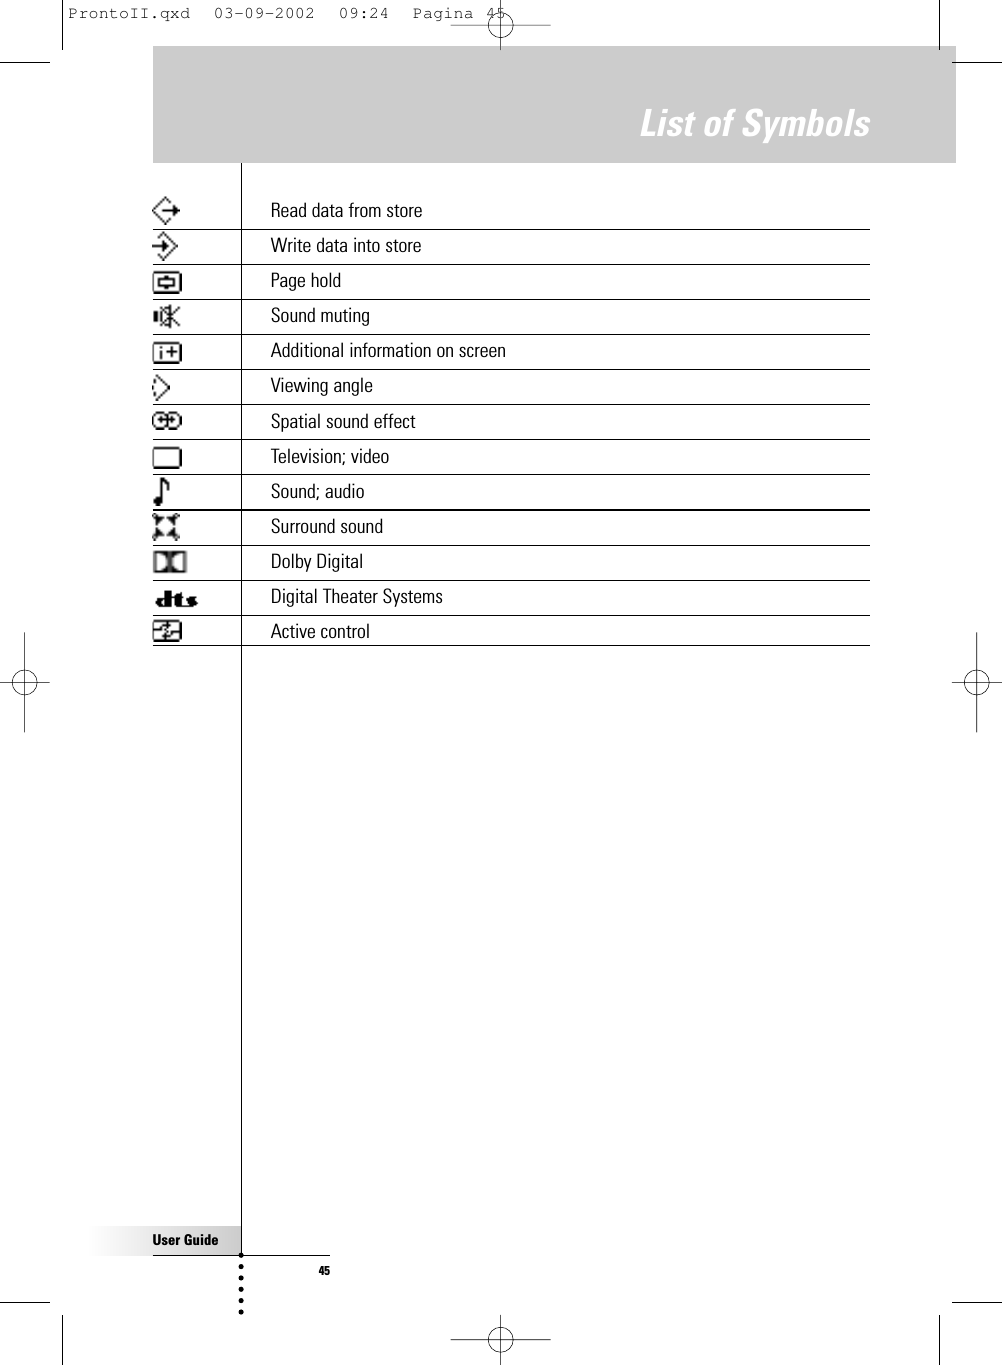 User Guide45List of Symbols Read data from storeWrite data into storePage holdSound mutingAdditional information on screenViewing angleSpatial sound effectTelevision; videoSound; audioSurround soundDolby DigitalDigital Theater SystemsActive control  ProntoII.qxd  03-09-2002  09:24  Pagina 45